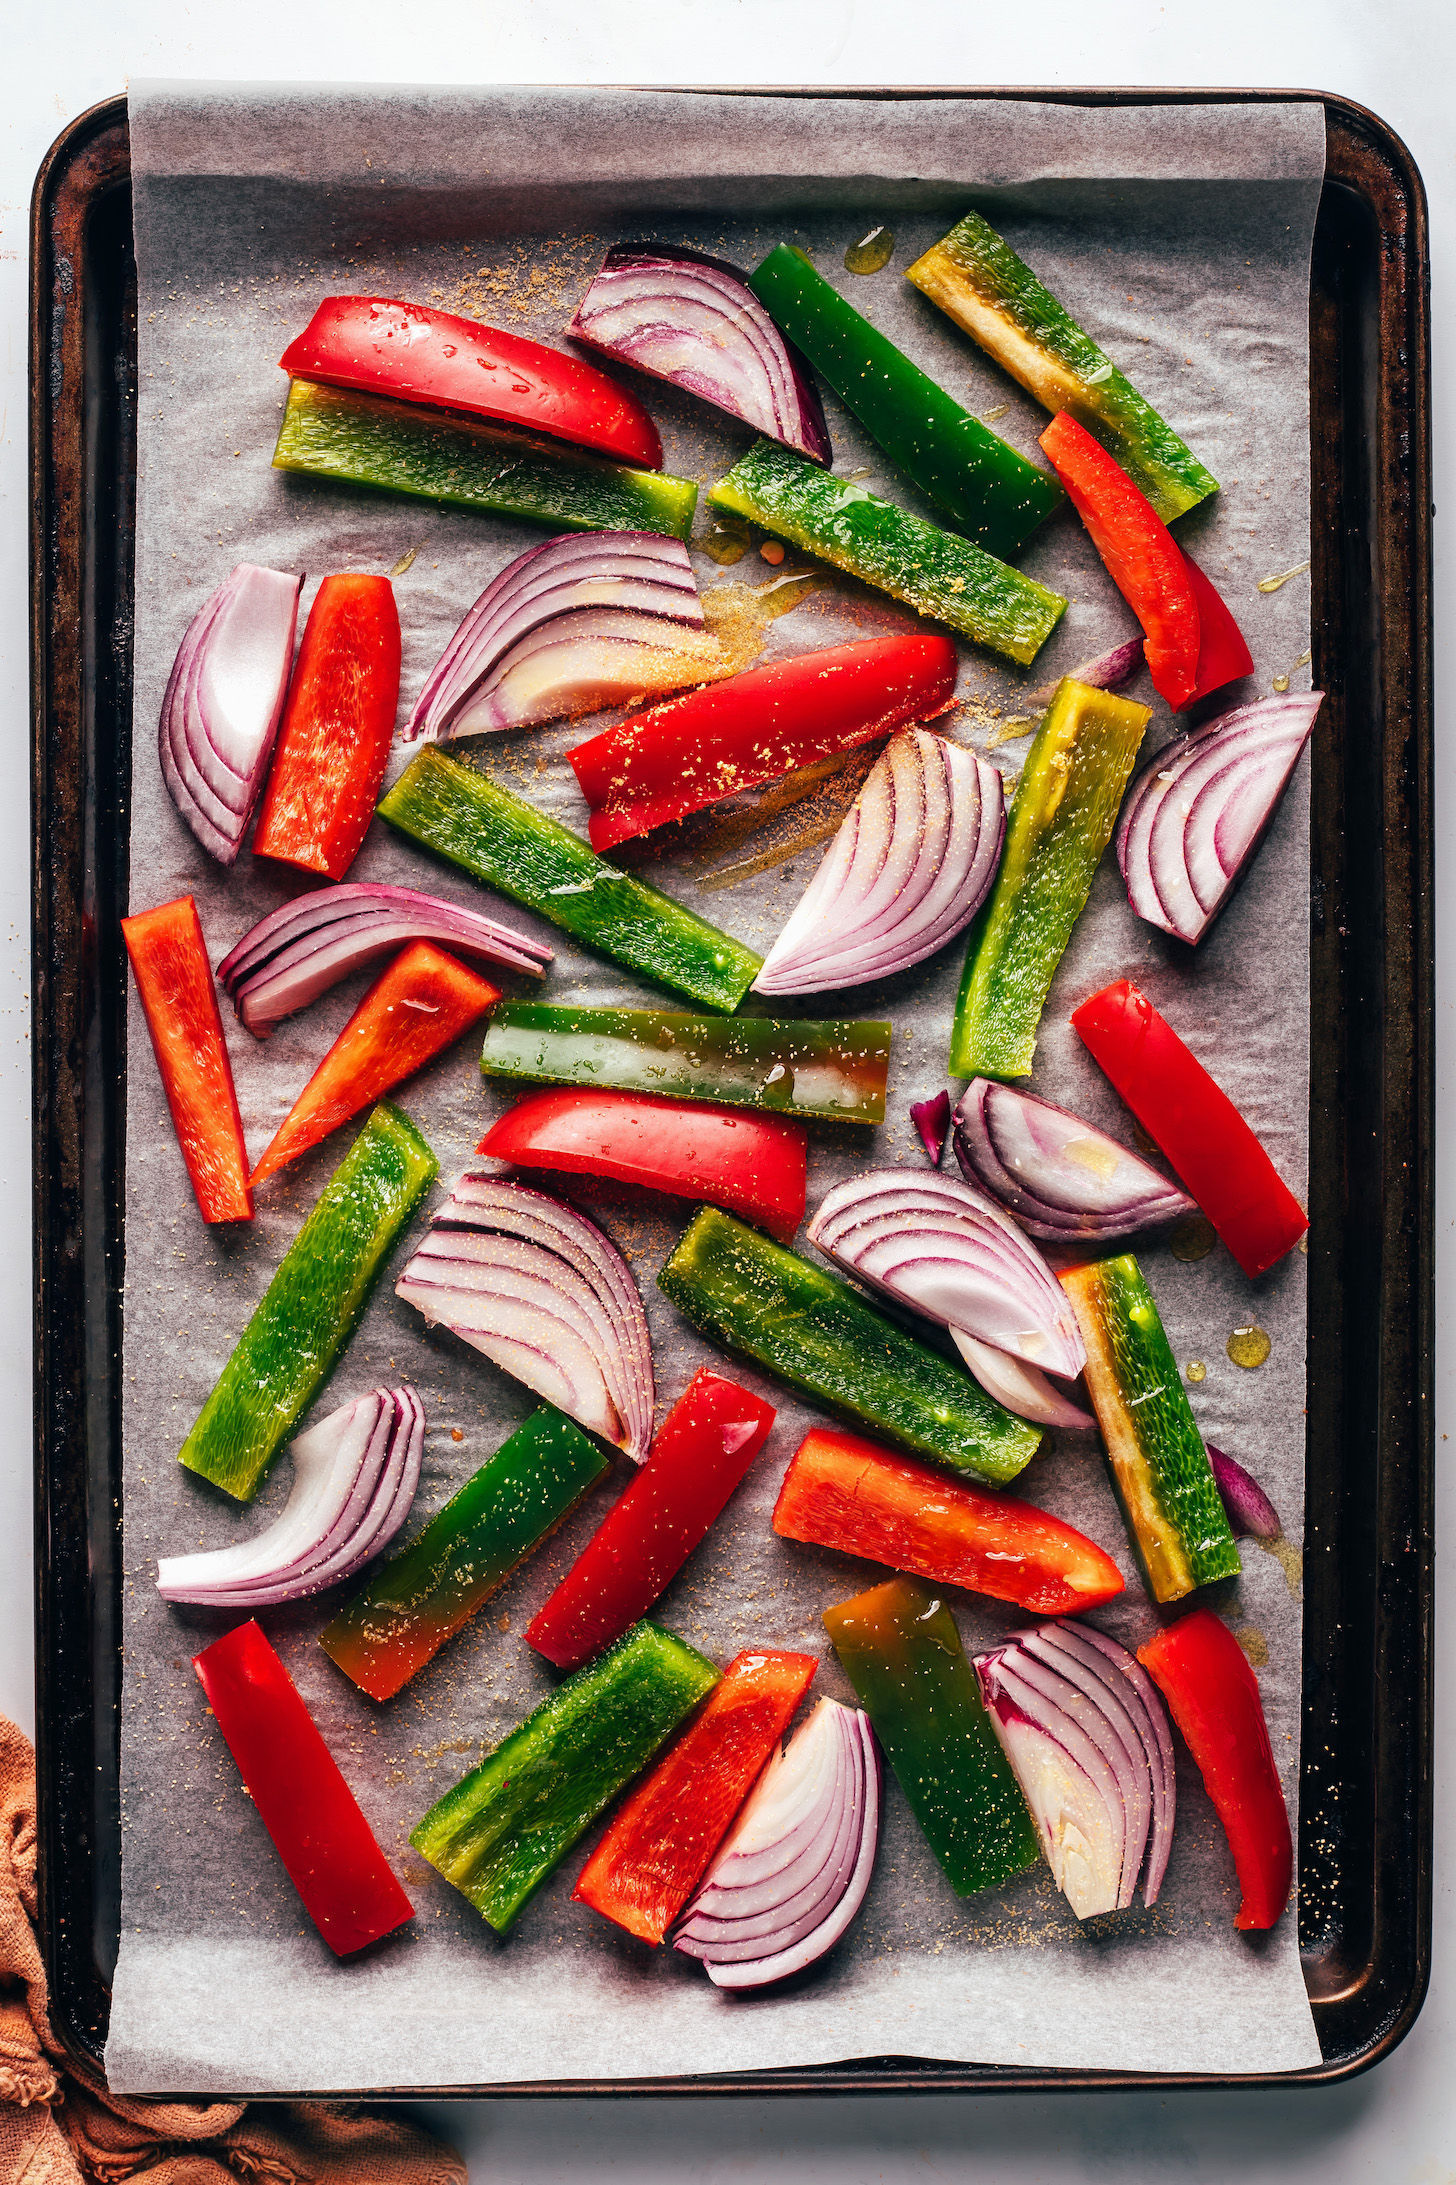 Sliced peppers and onions on a parchment-lined baking sheet